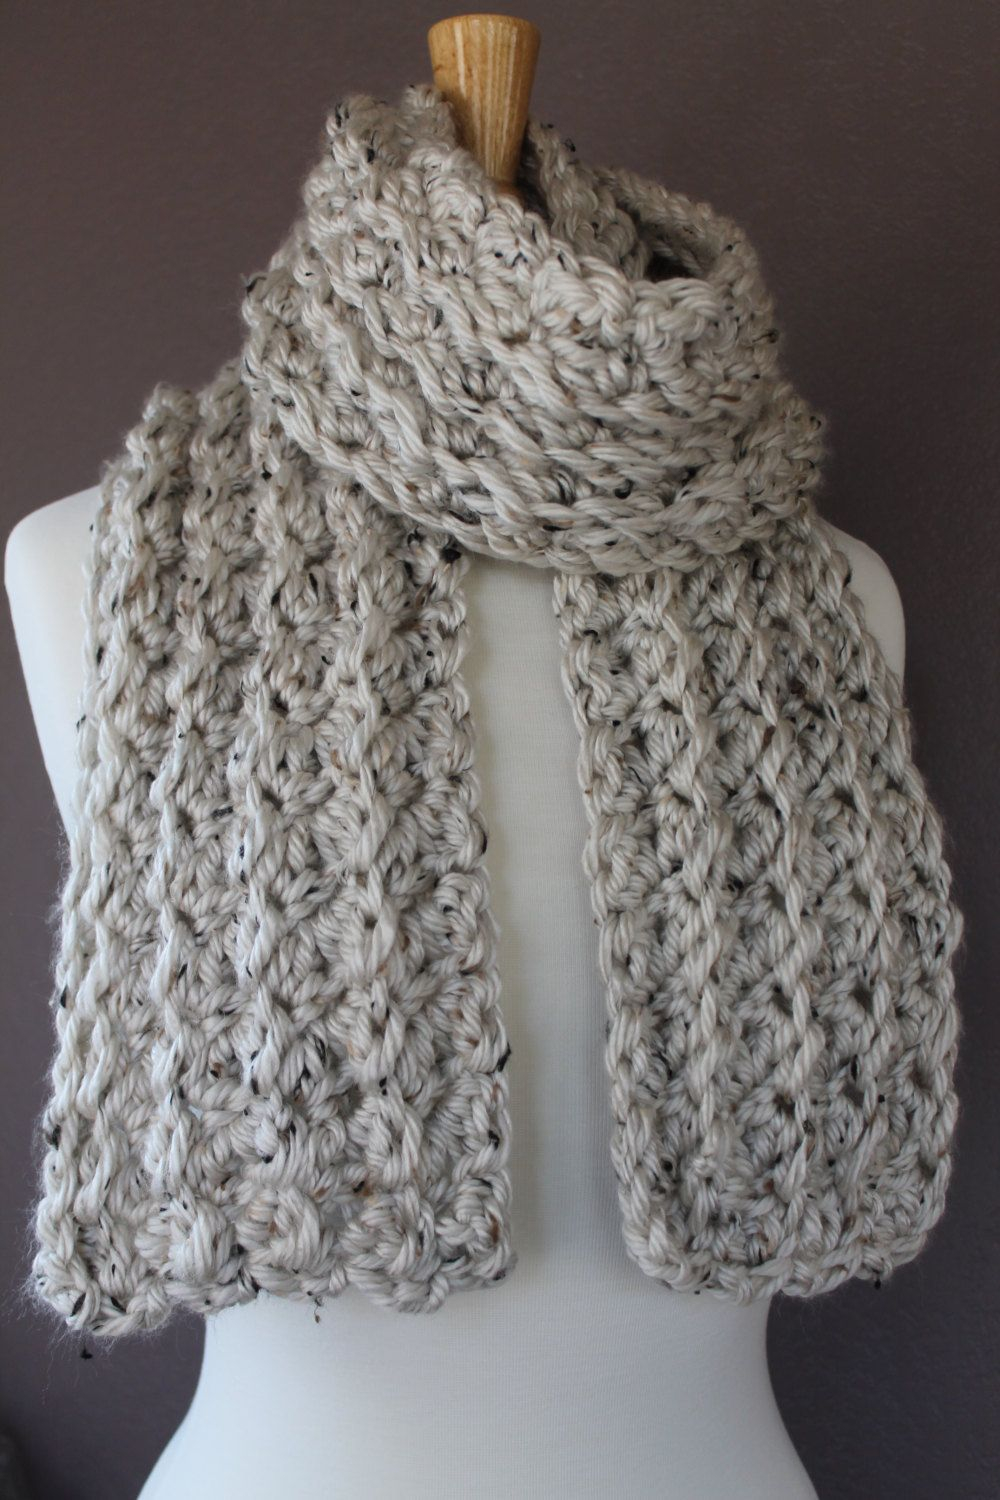 Crocheted Scarf Patterns Come And Check Out This Very Easy Crochet Scarf Pattern From Crafty